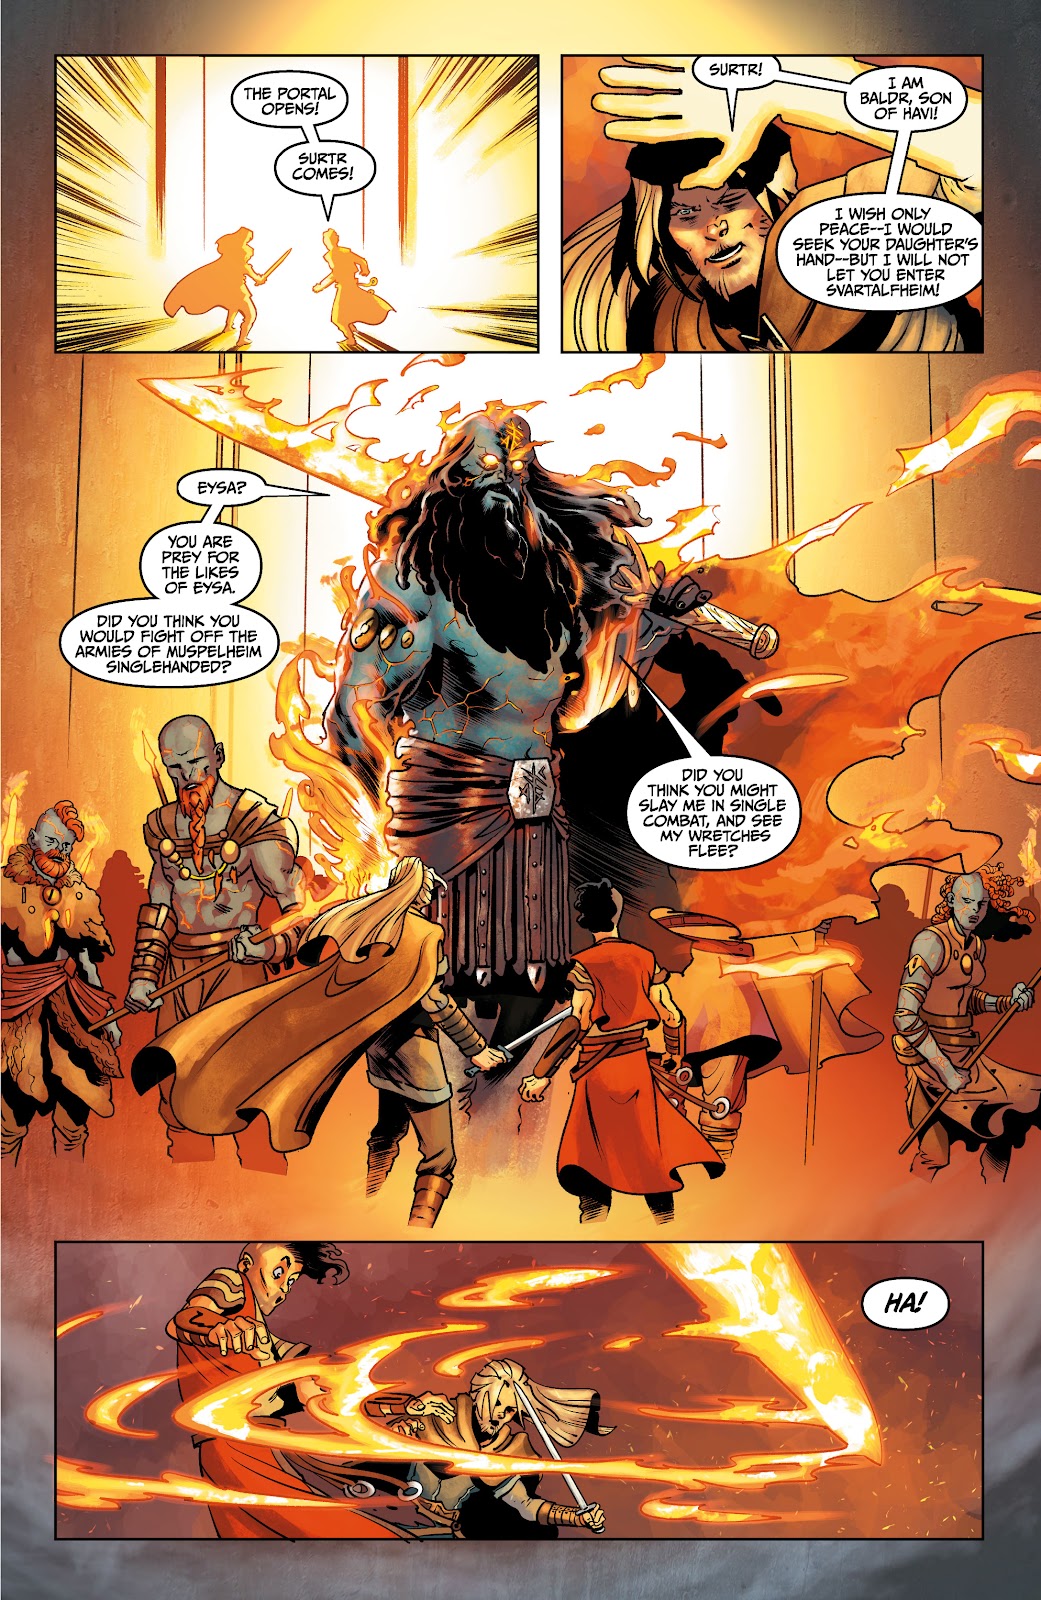 Assassin's Creed Valhalla: Forgotten Myths issue 3 - Page 11